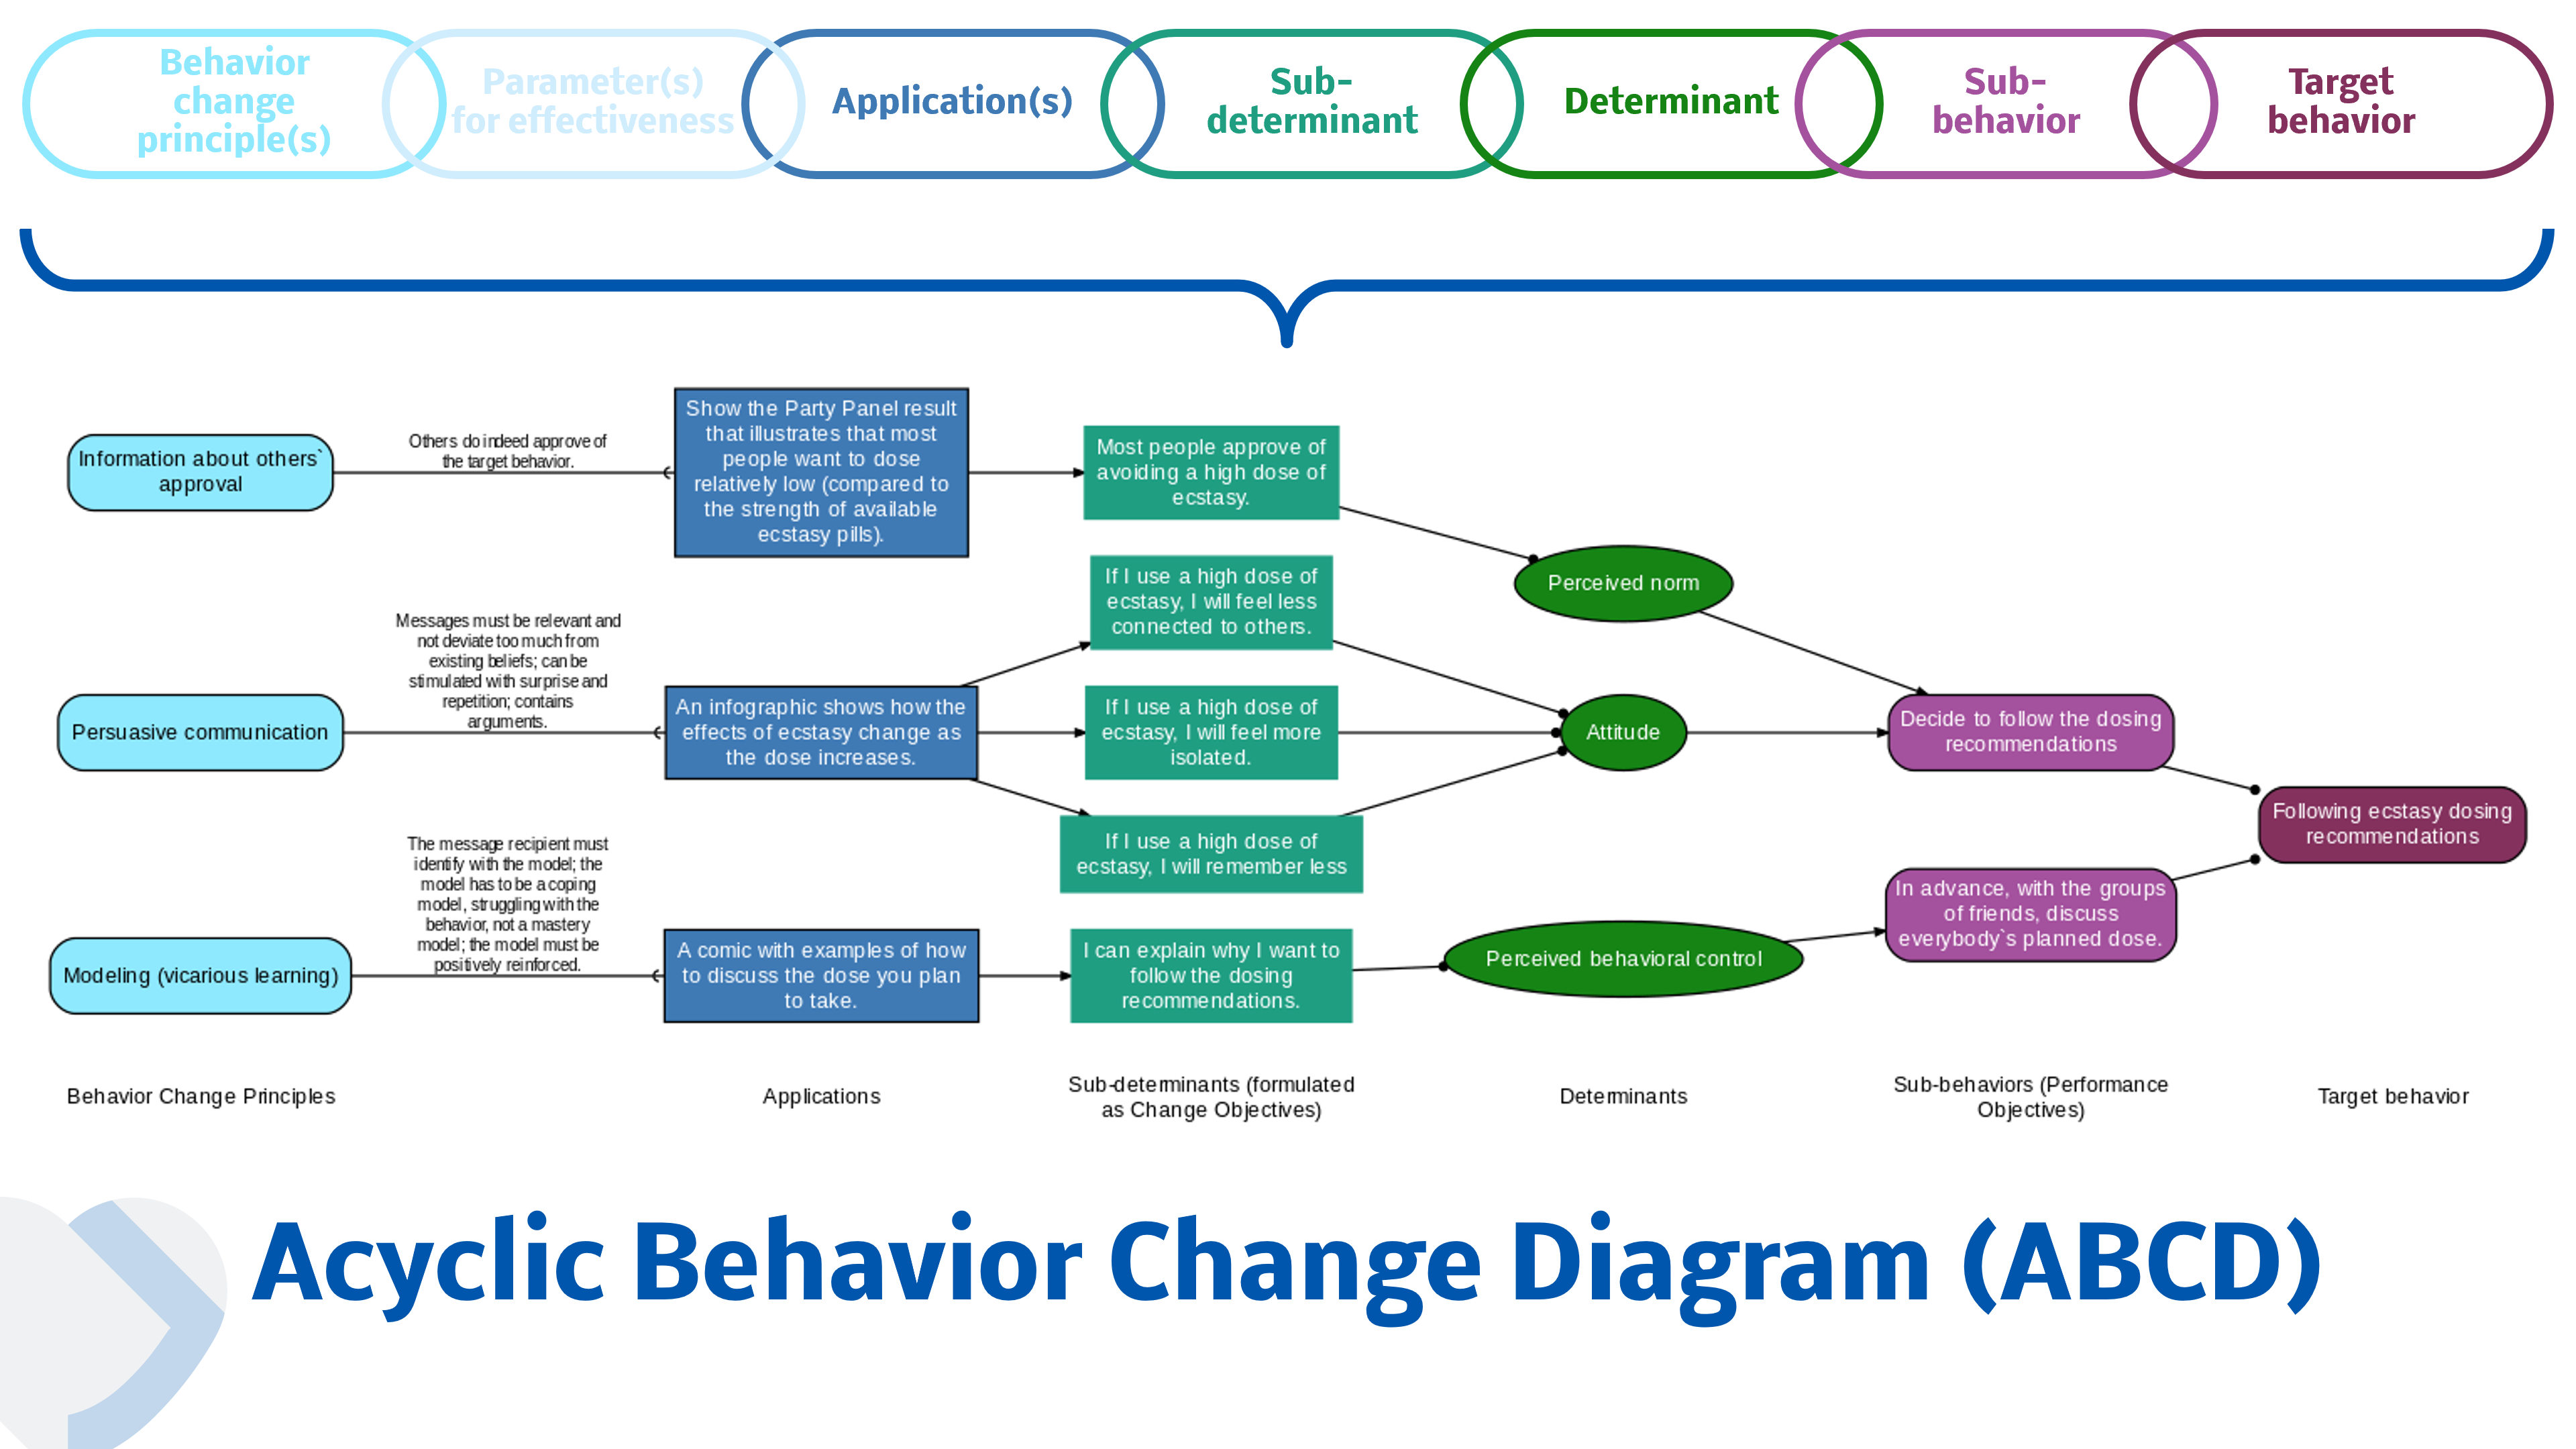 An image showing an acyclic behavior change diagram and above it, a causal structural chain.